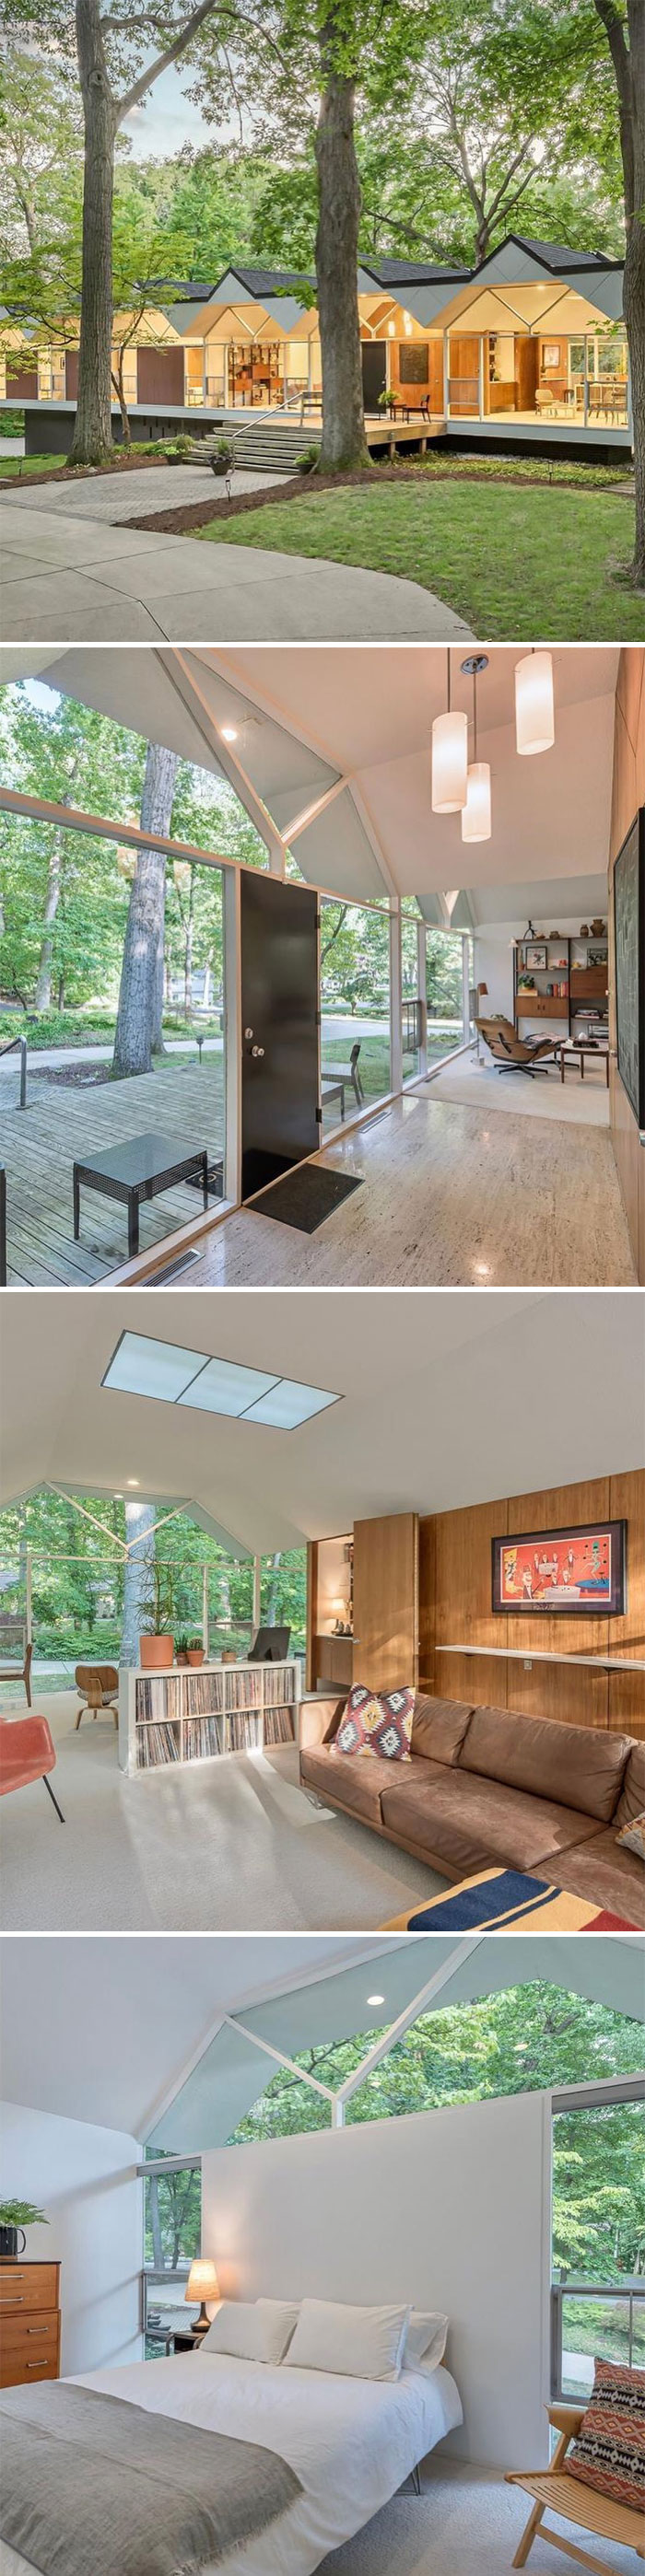 Verified I’ve Never Said This Before But Here’s A Perfect Mid-Century Modern Home In Farmington, Mi. This Is Called Arthur Beckwith House And Is Currently Listed At $899,000. 5 Bd. 3.555 Ba. 3,000 Sq Ft. 1.21 Acres. Follow @zillowgonewild For More Wild Homes Every Day!!